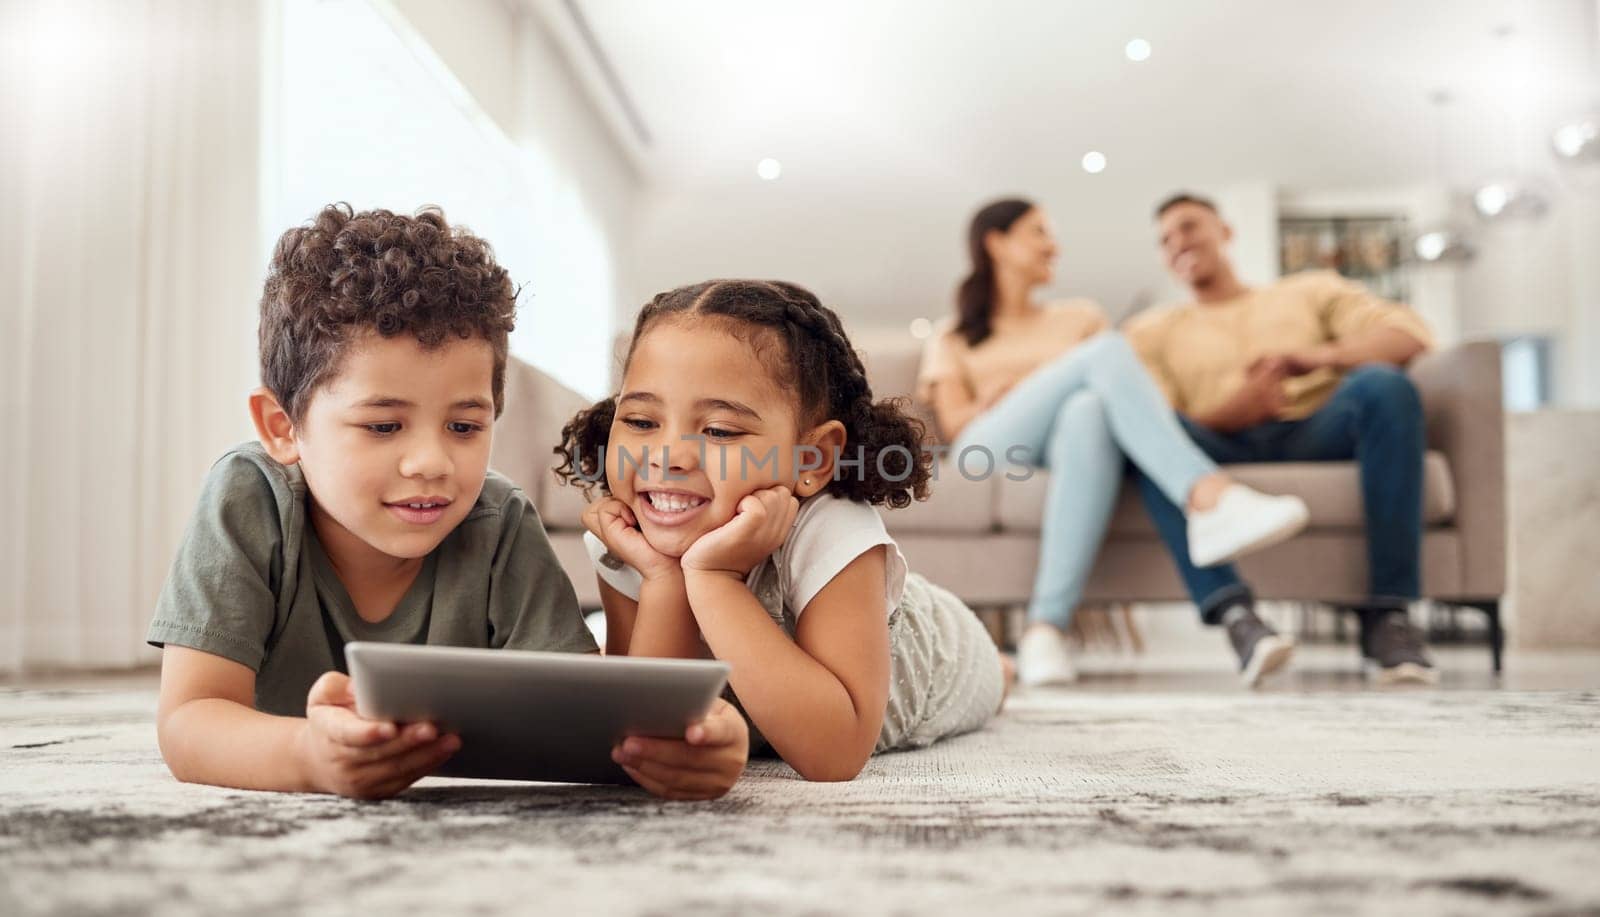 Learning, tablet and children streaming a video on technology on the living room floor of their house. Education, happiness and movies on technology for kids with parents on the sofa in their home.